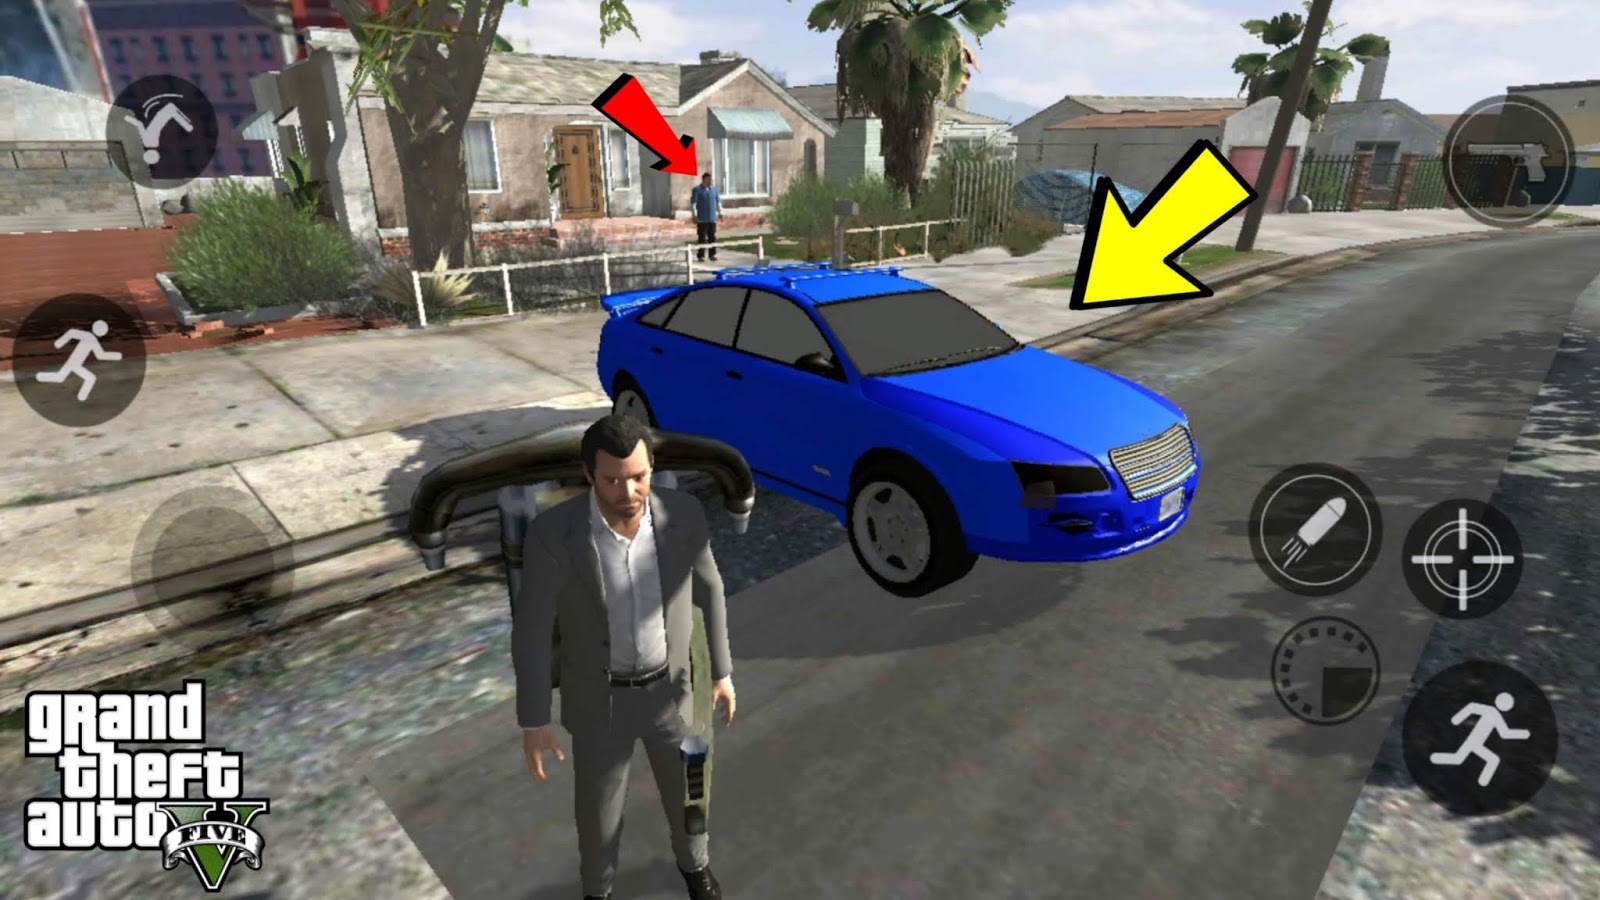 Gta 5 mobile android skachat фото 68